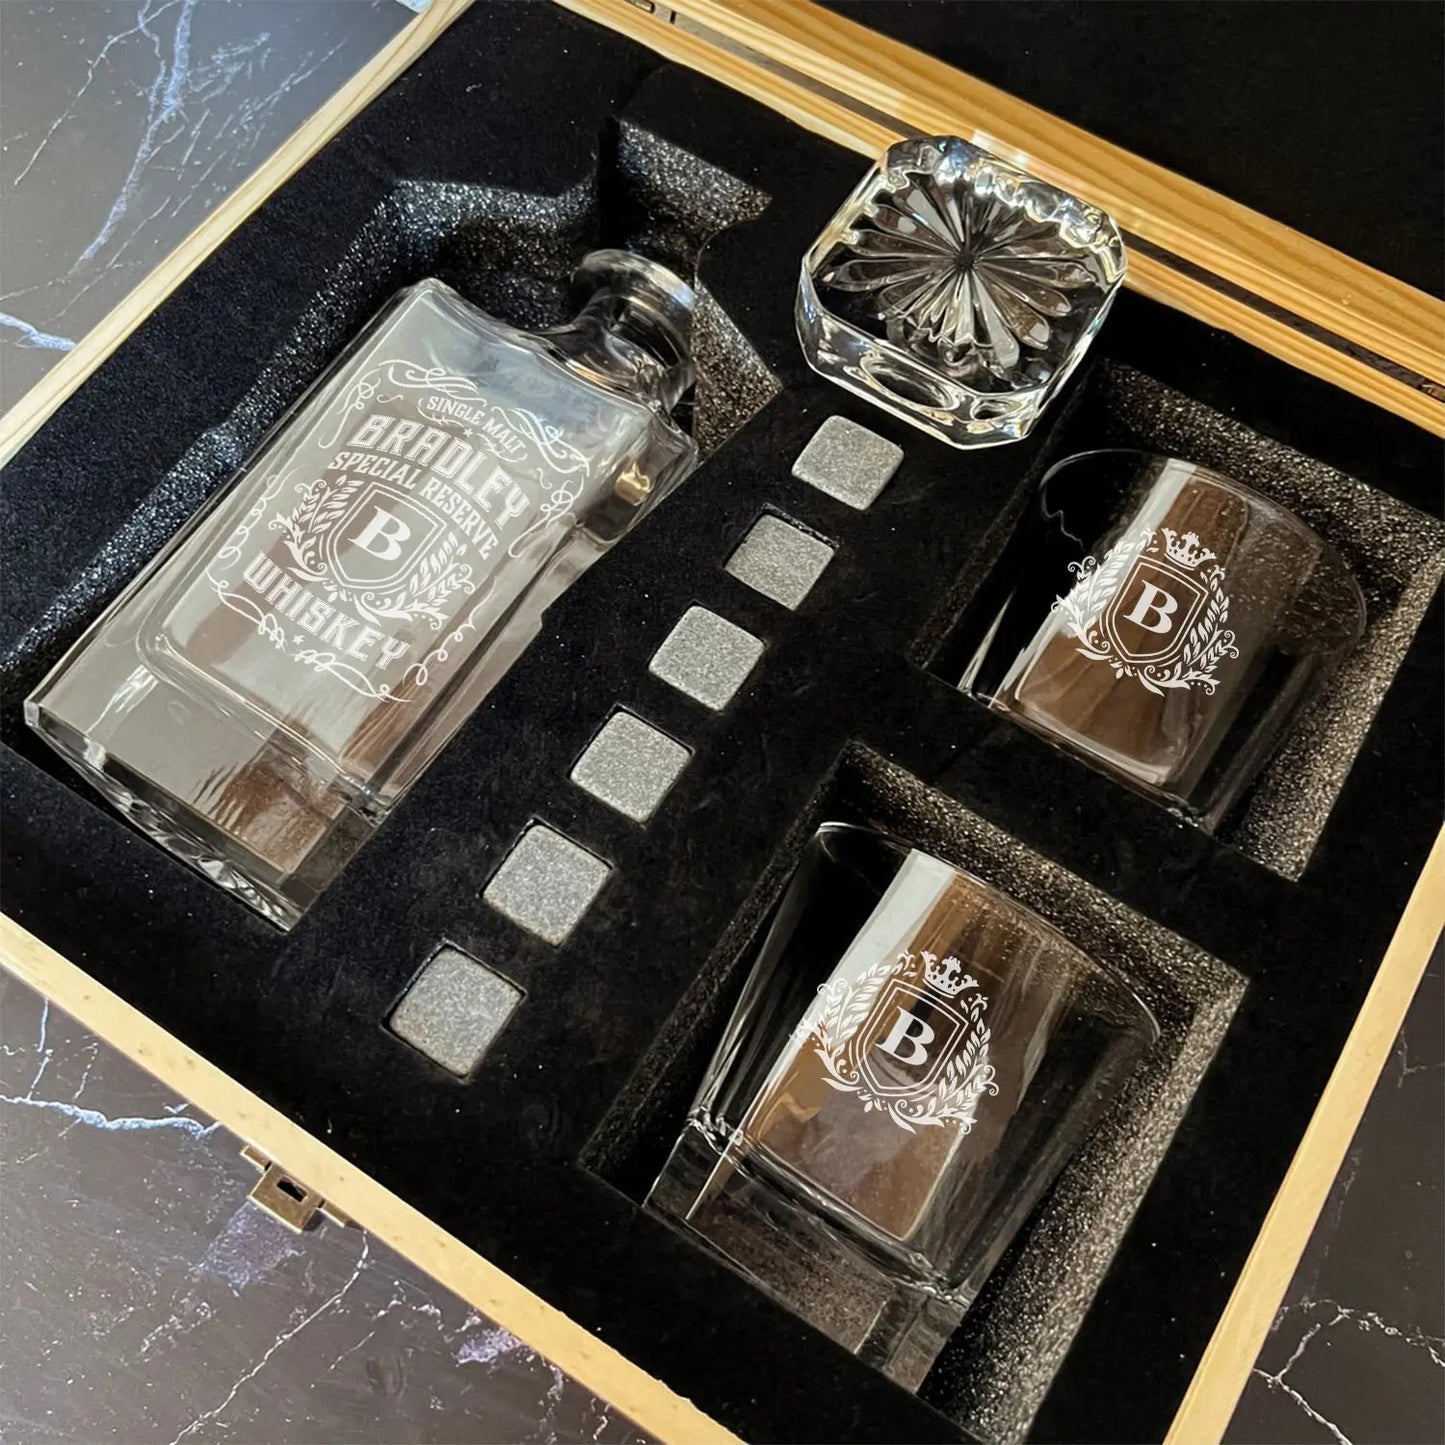 BRADLEY A01 Personalized Decanter Set wooden box and Ice 9